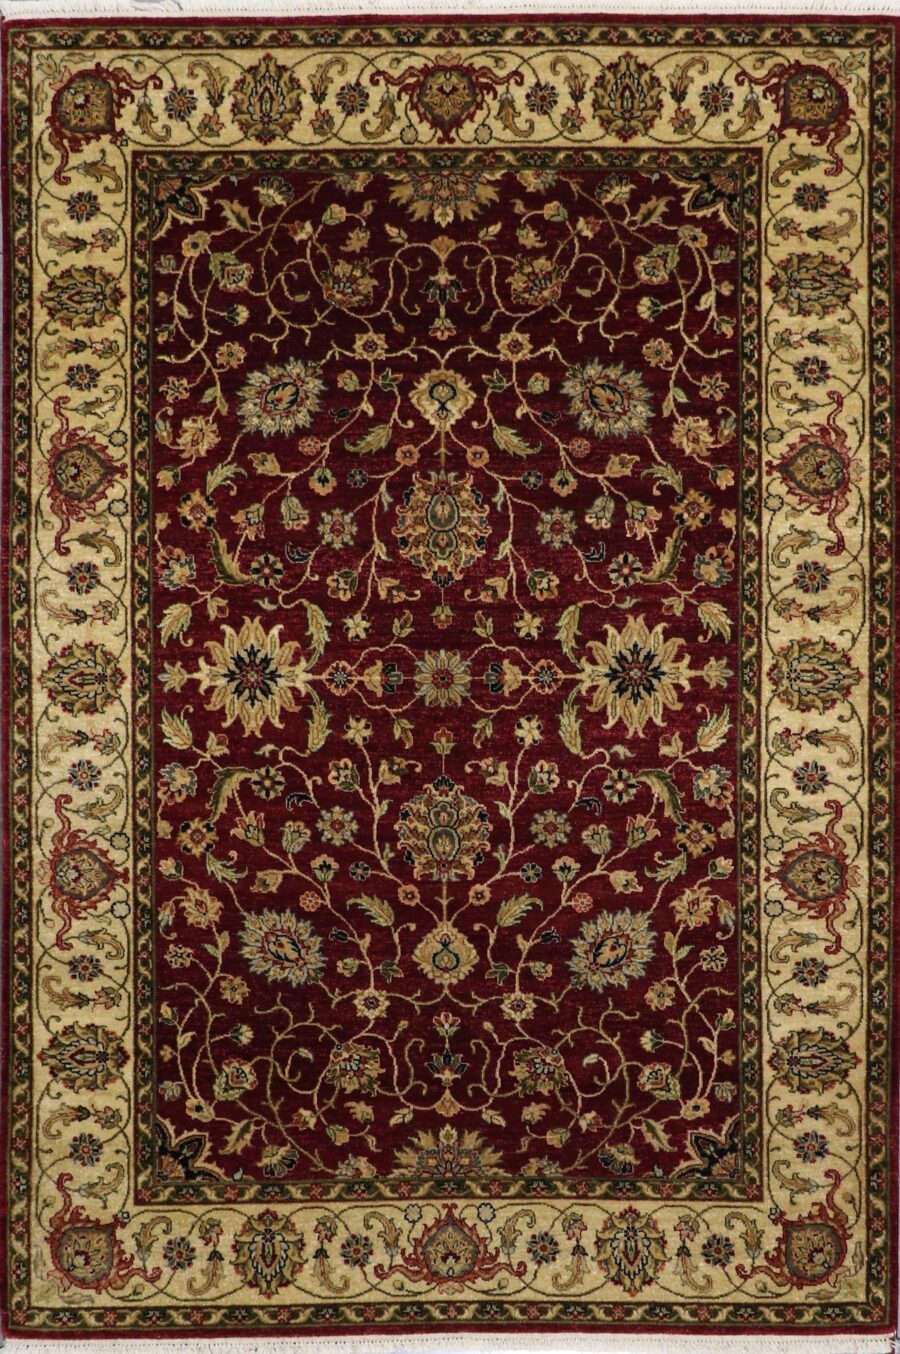 5'9"x8'6" Traditional Burgundy Kashan Wool & Silk Hand-Knotted Rug - Direct Rug Import | Rugs in Chicago, Indiana,South Bend,Granger